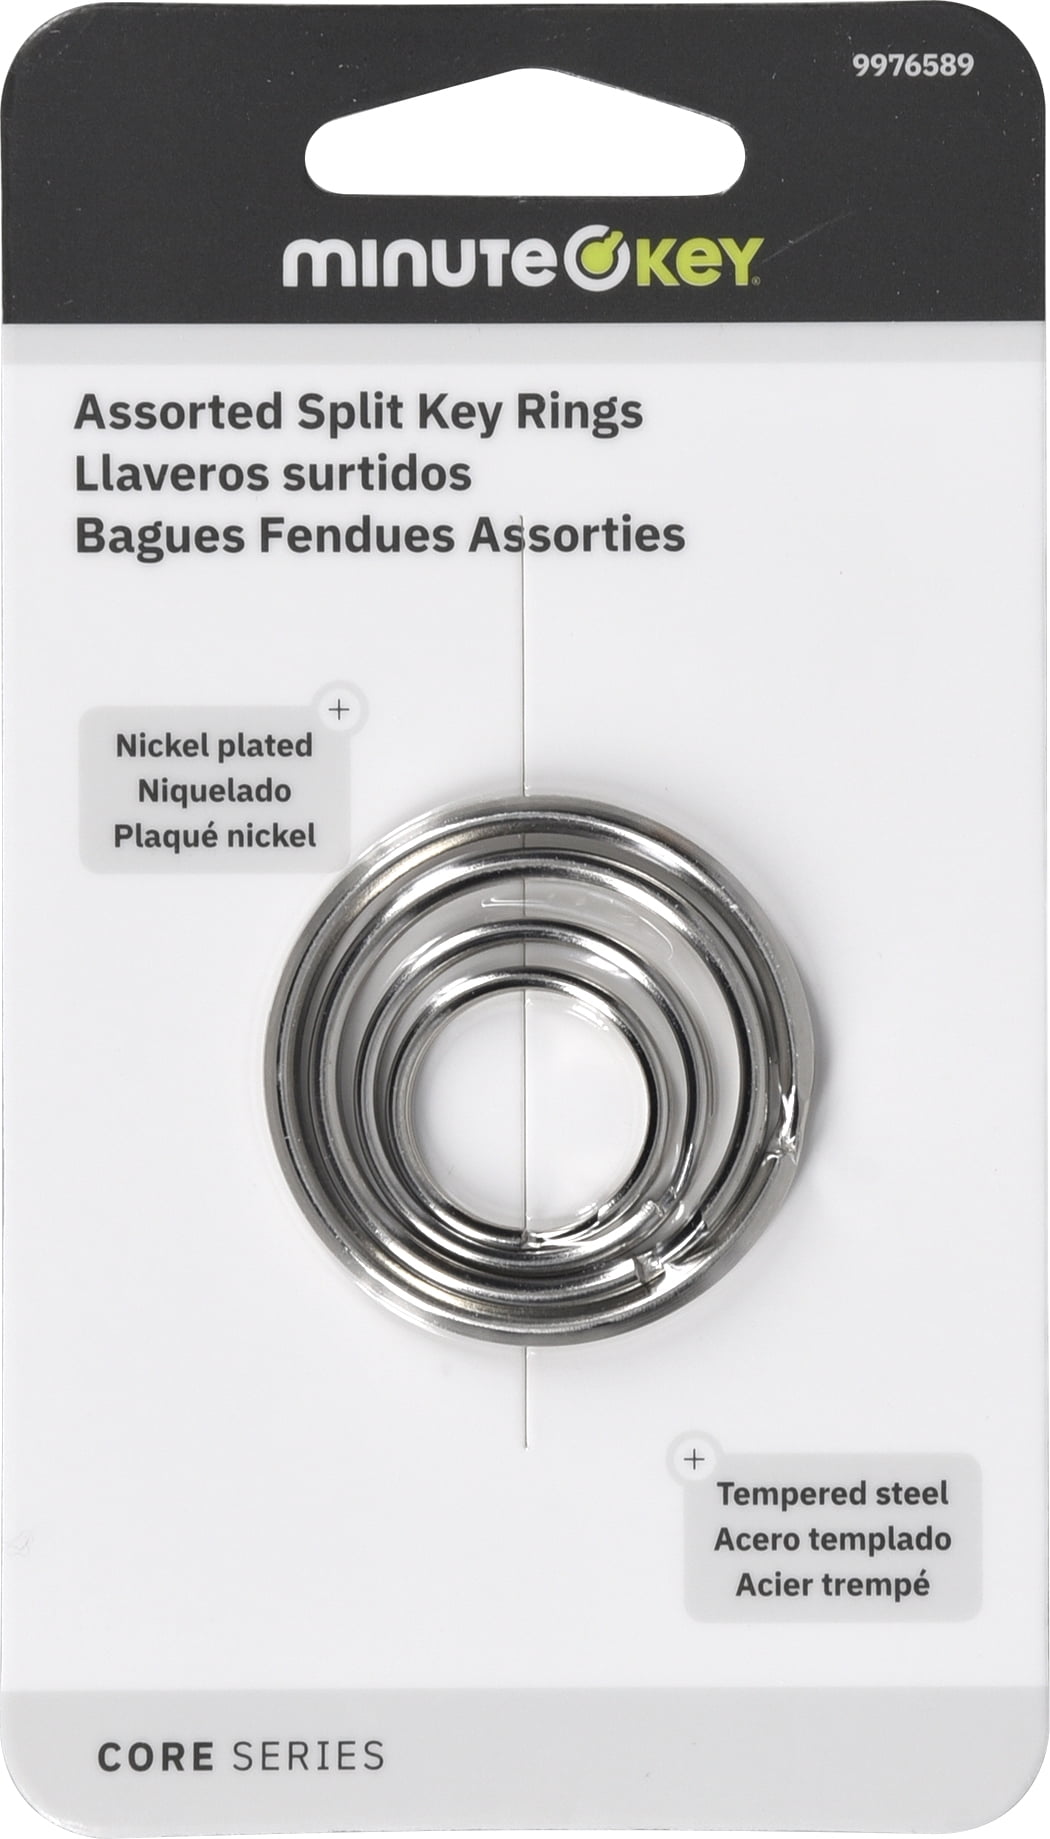 Minute Key Assorted Size Split Rings, Silver, Tempered Steel